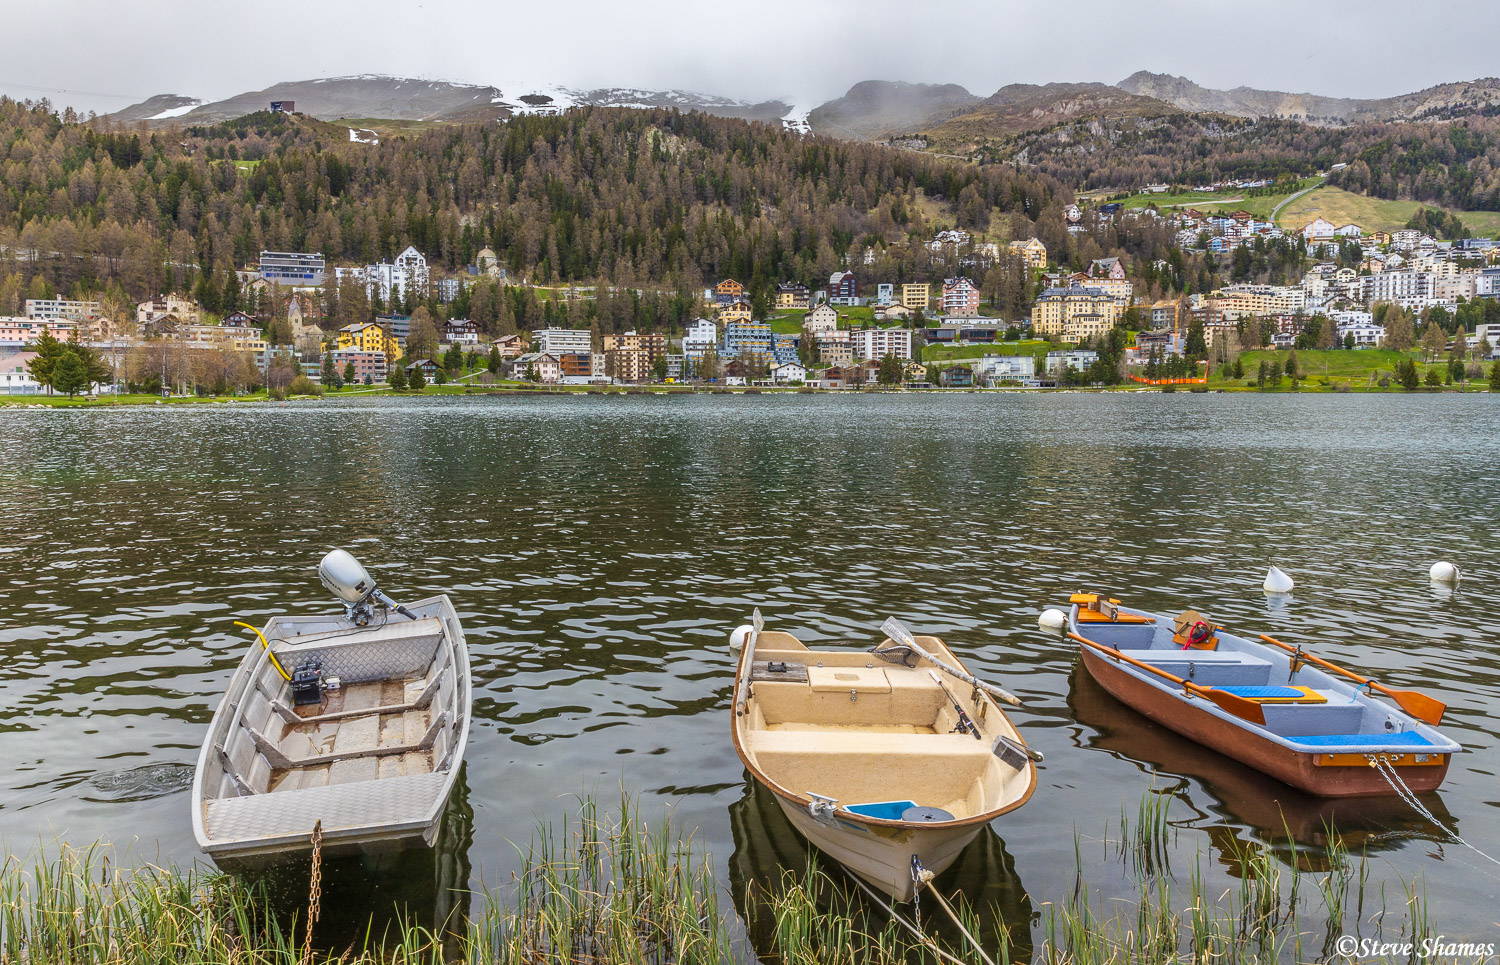 Along the shore of Lake St. Moritz. I like the boats with the town on the distant shore. St. Moritz is a scenic town.